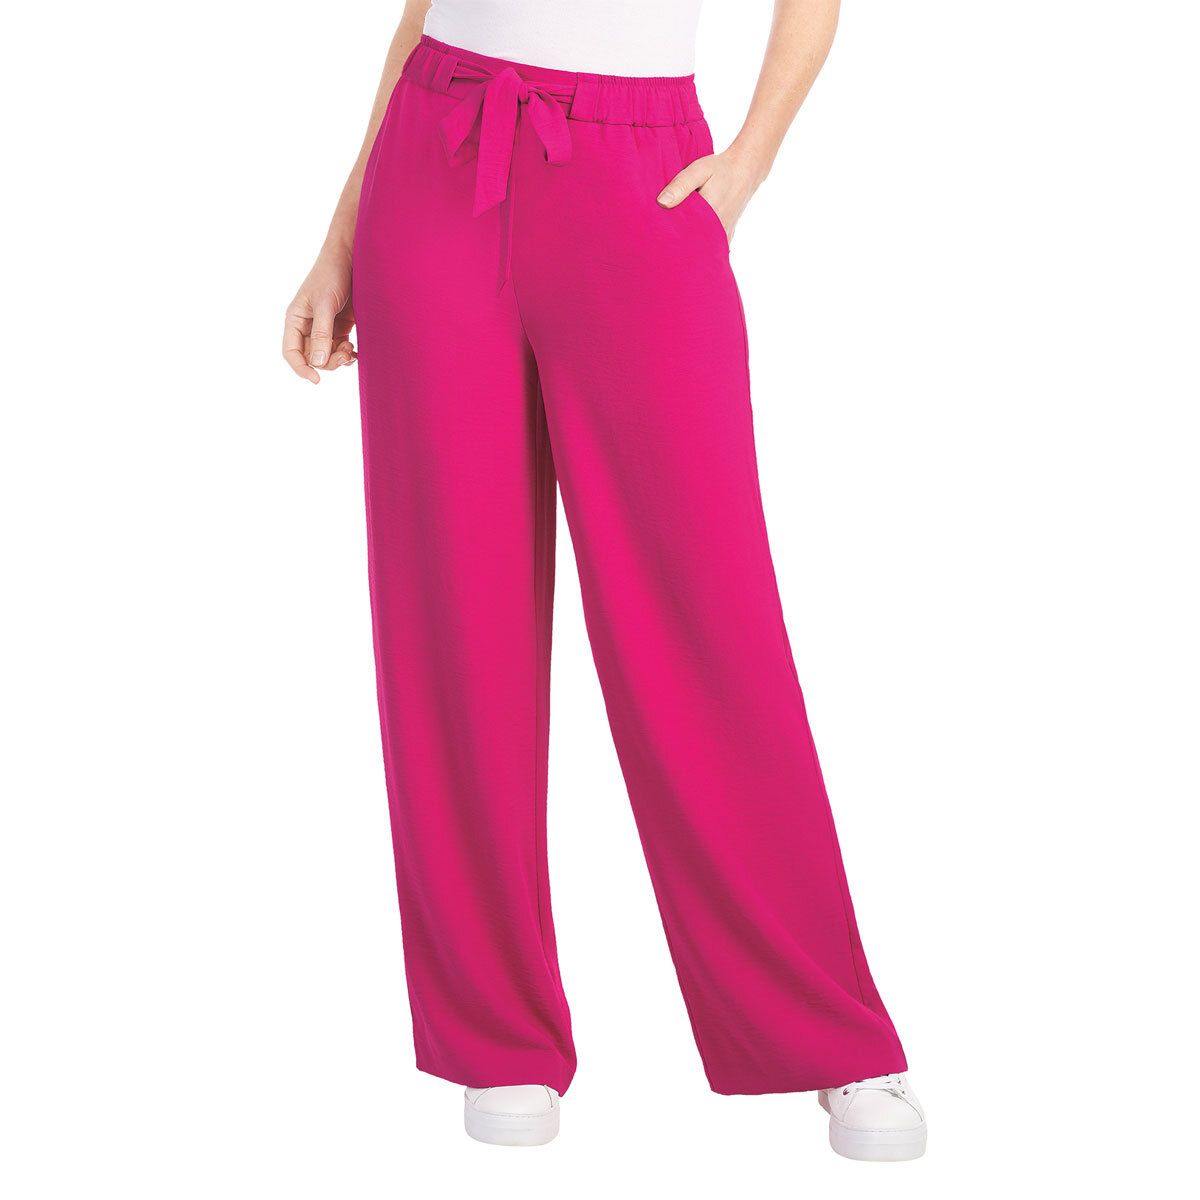 Hilary Radley Ladies Wide Leg Trousers in 4 Colours & 4 Sizes